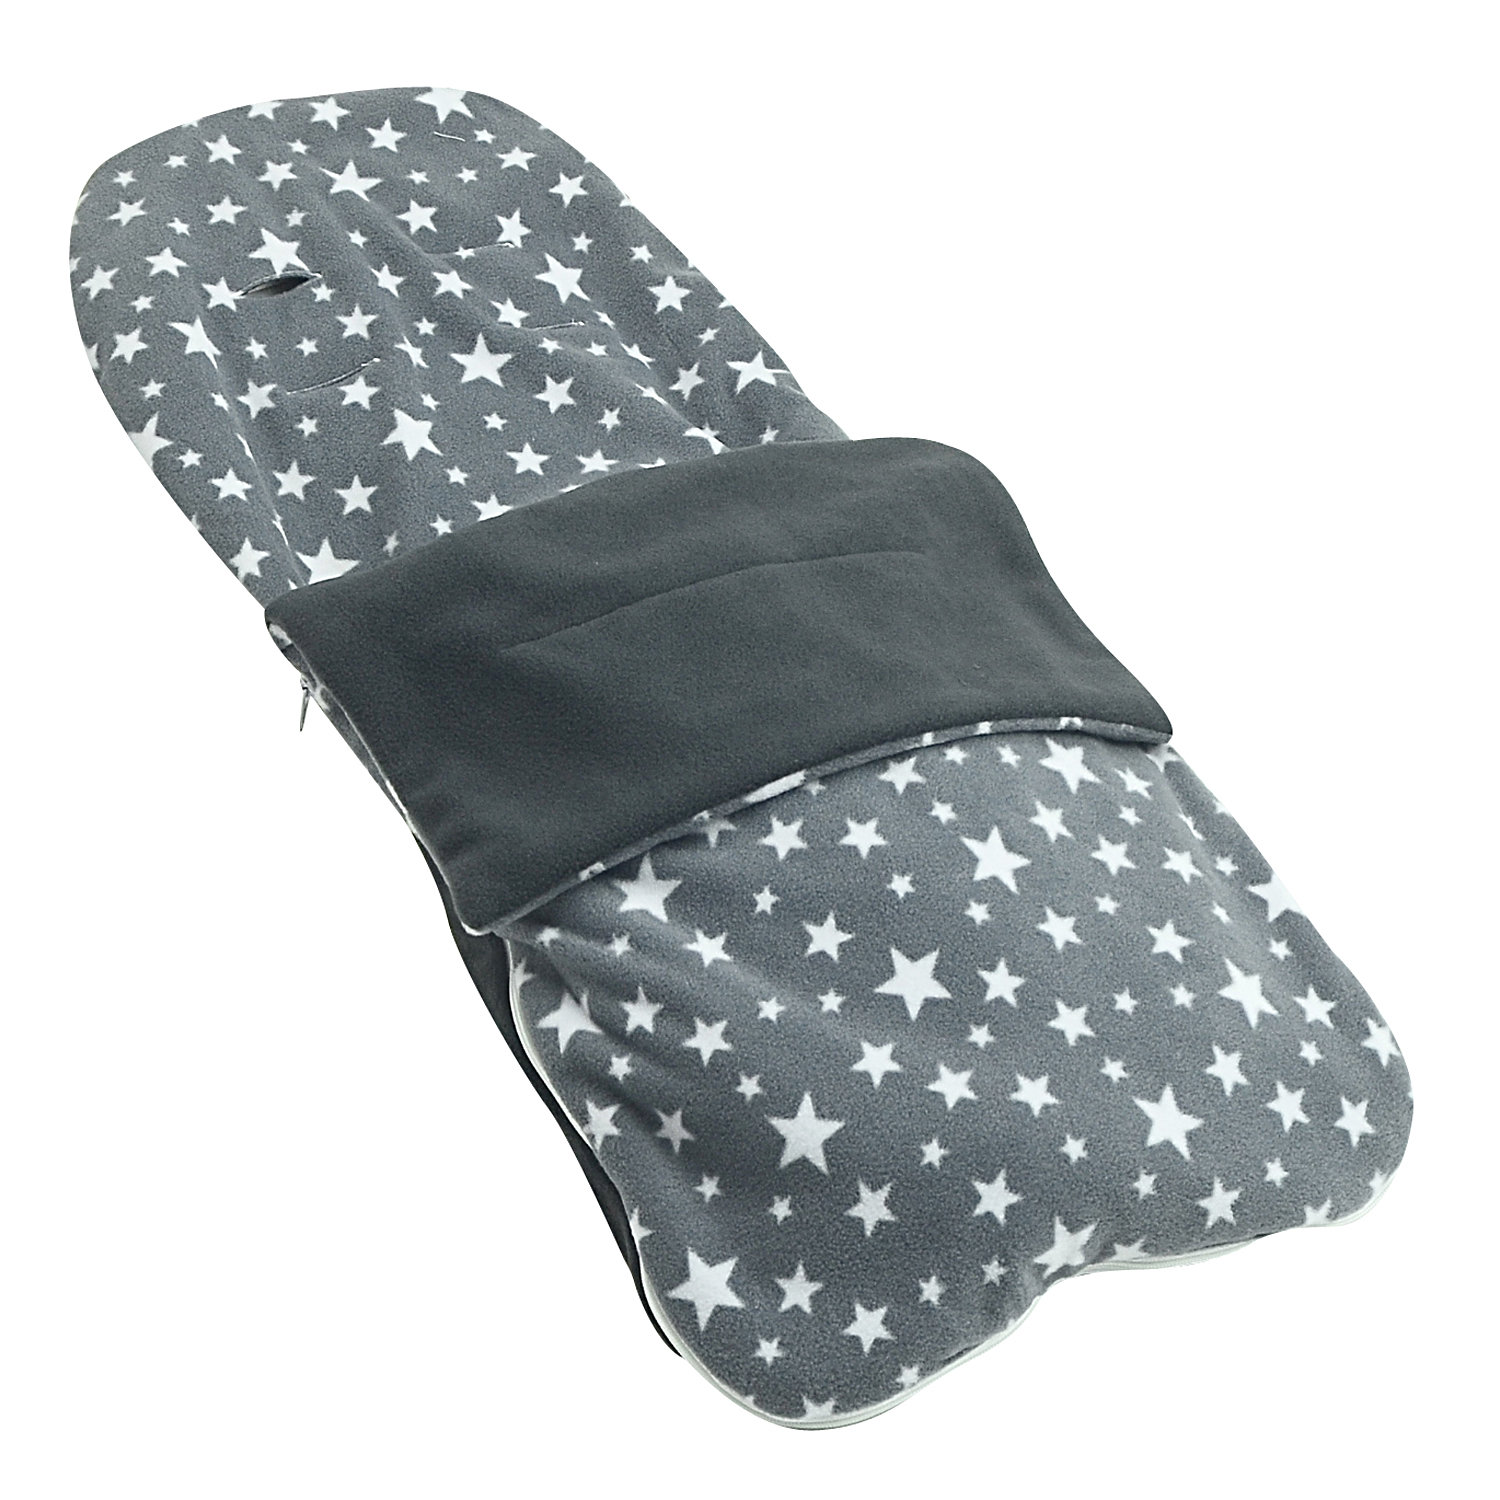 Snuggle Summer Footmuff Compatible With Inglesina Urbe - Grey Star